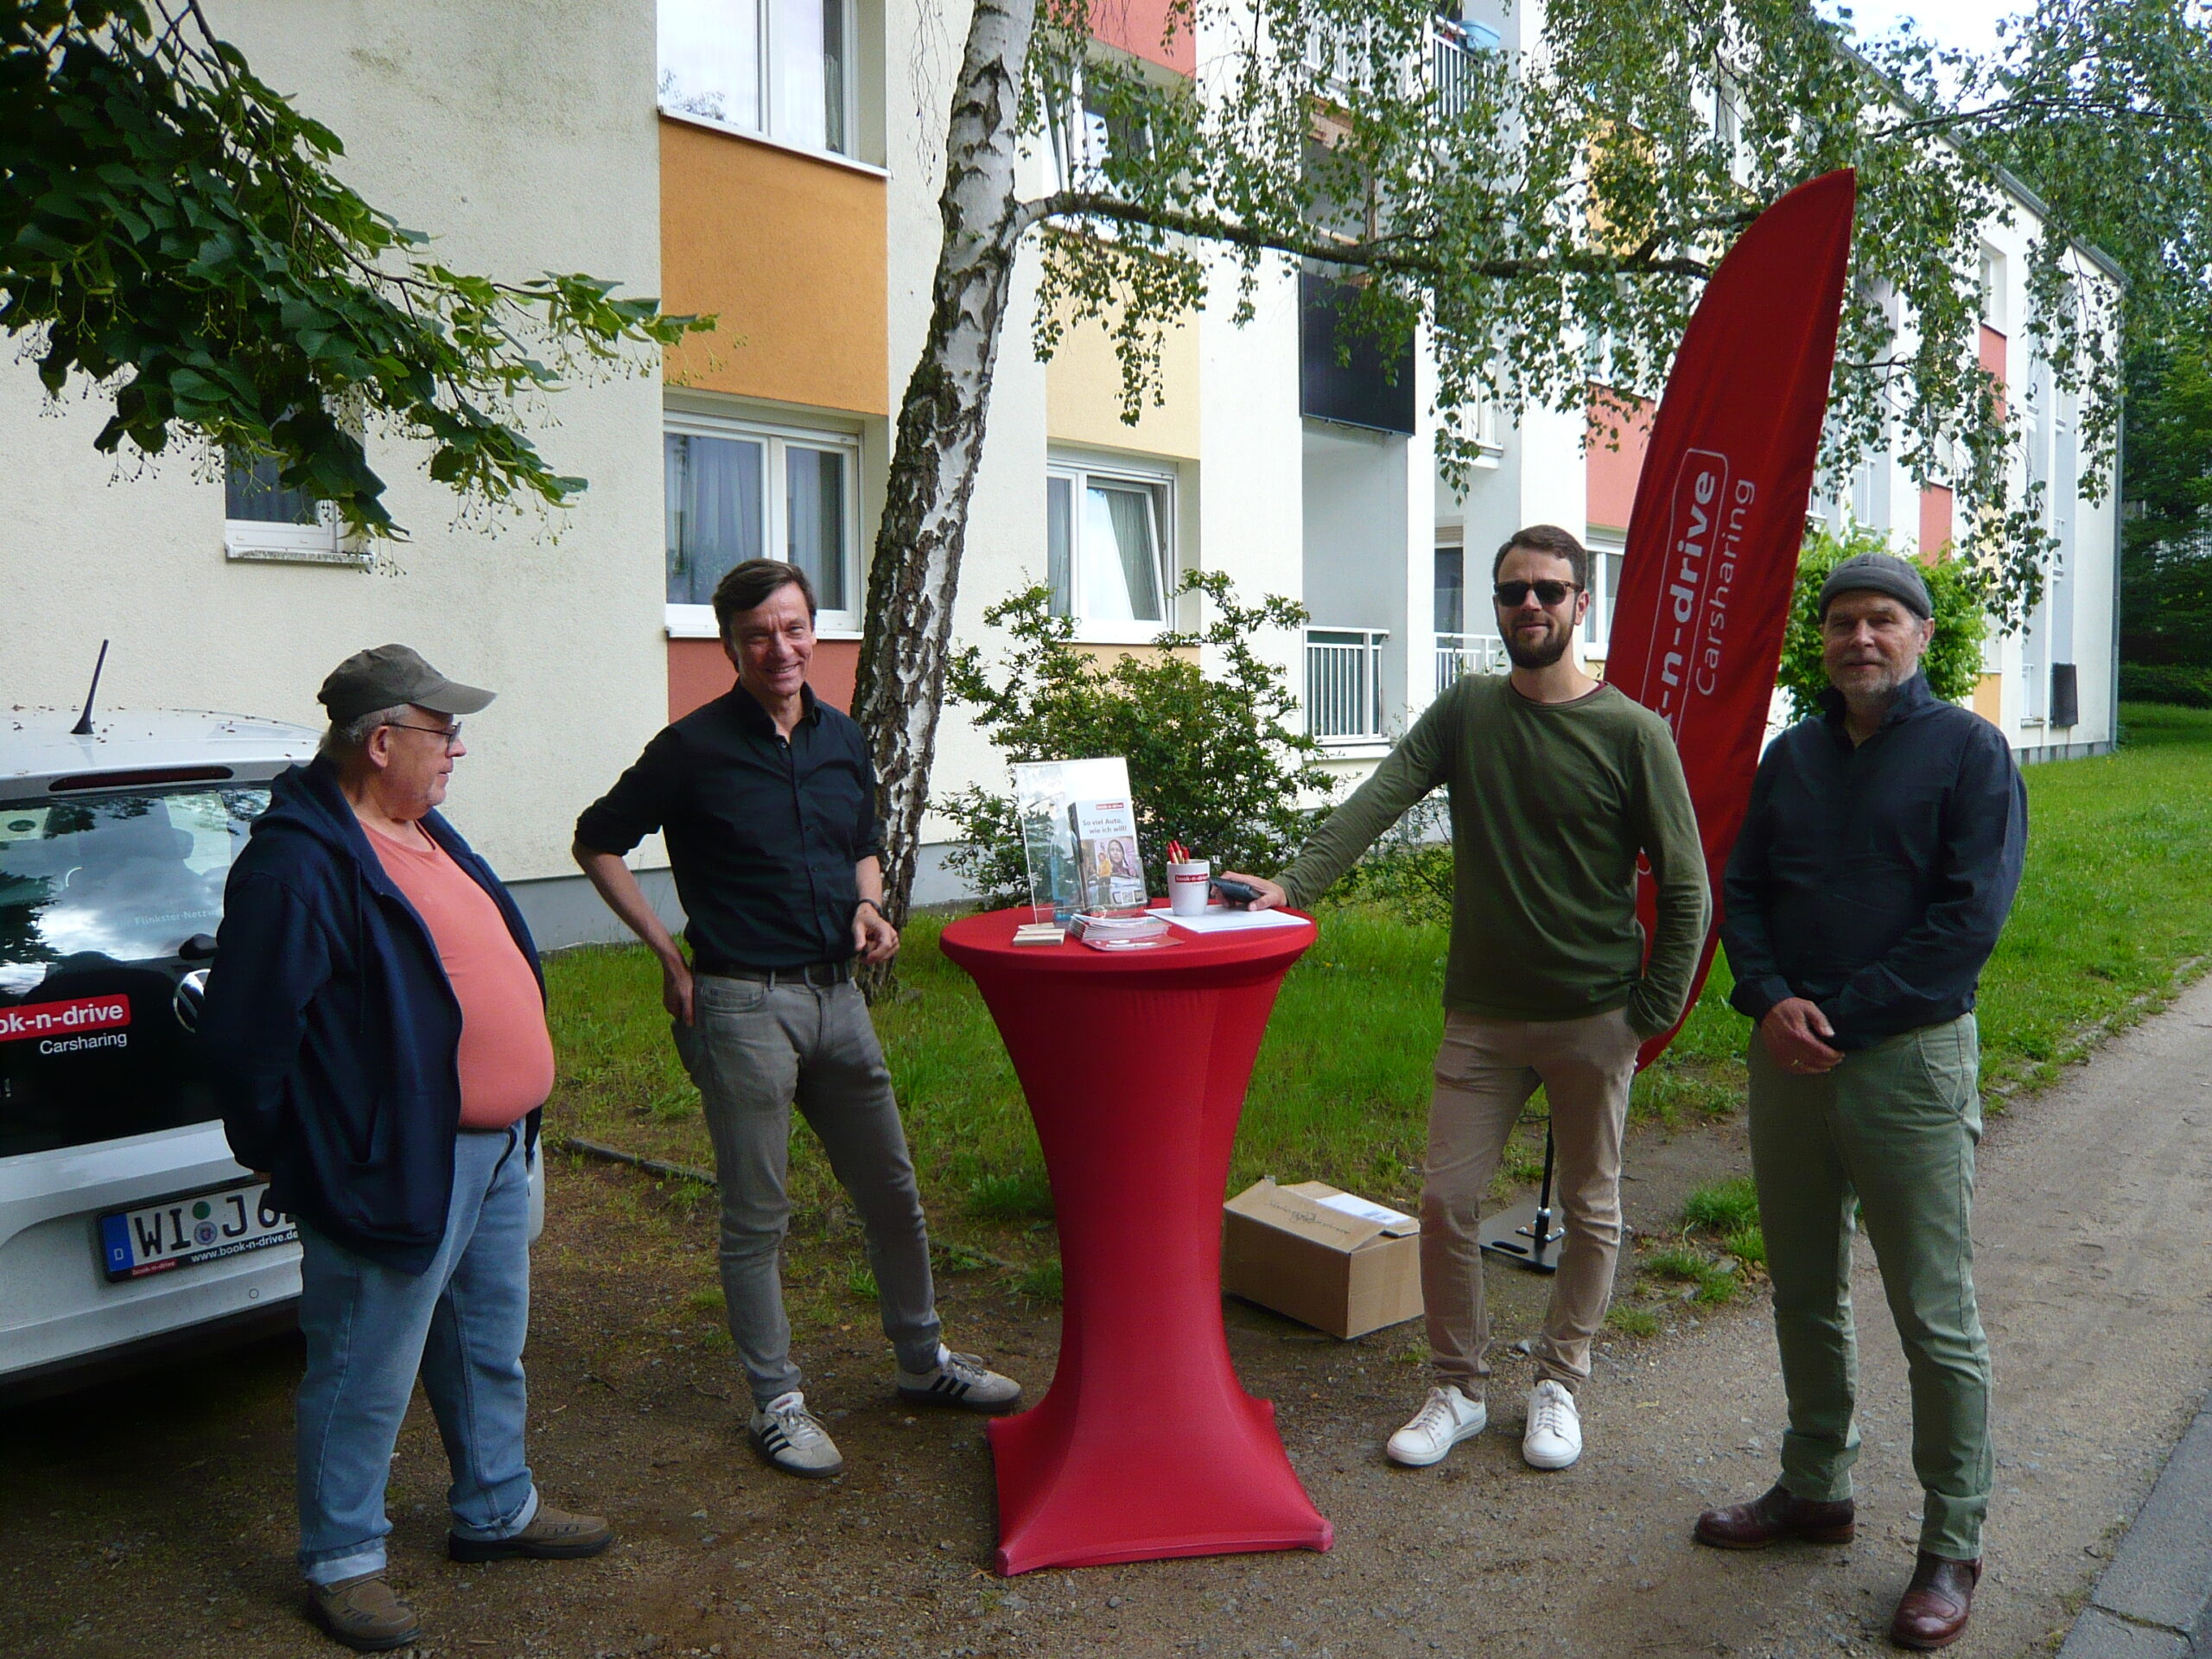 You are currently viewing Quartier: Informativer book-n-drive Infostand beim Freitagscafé